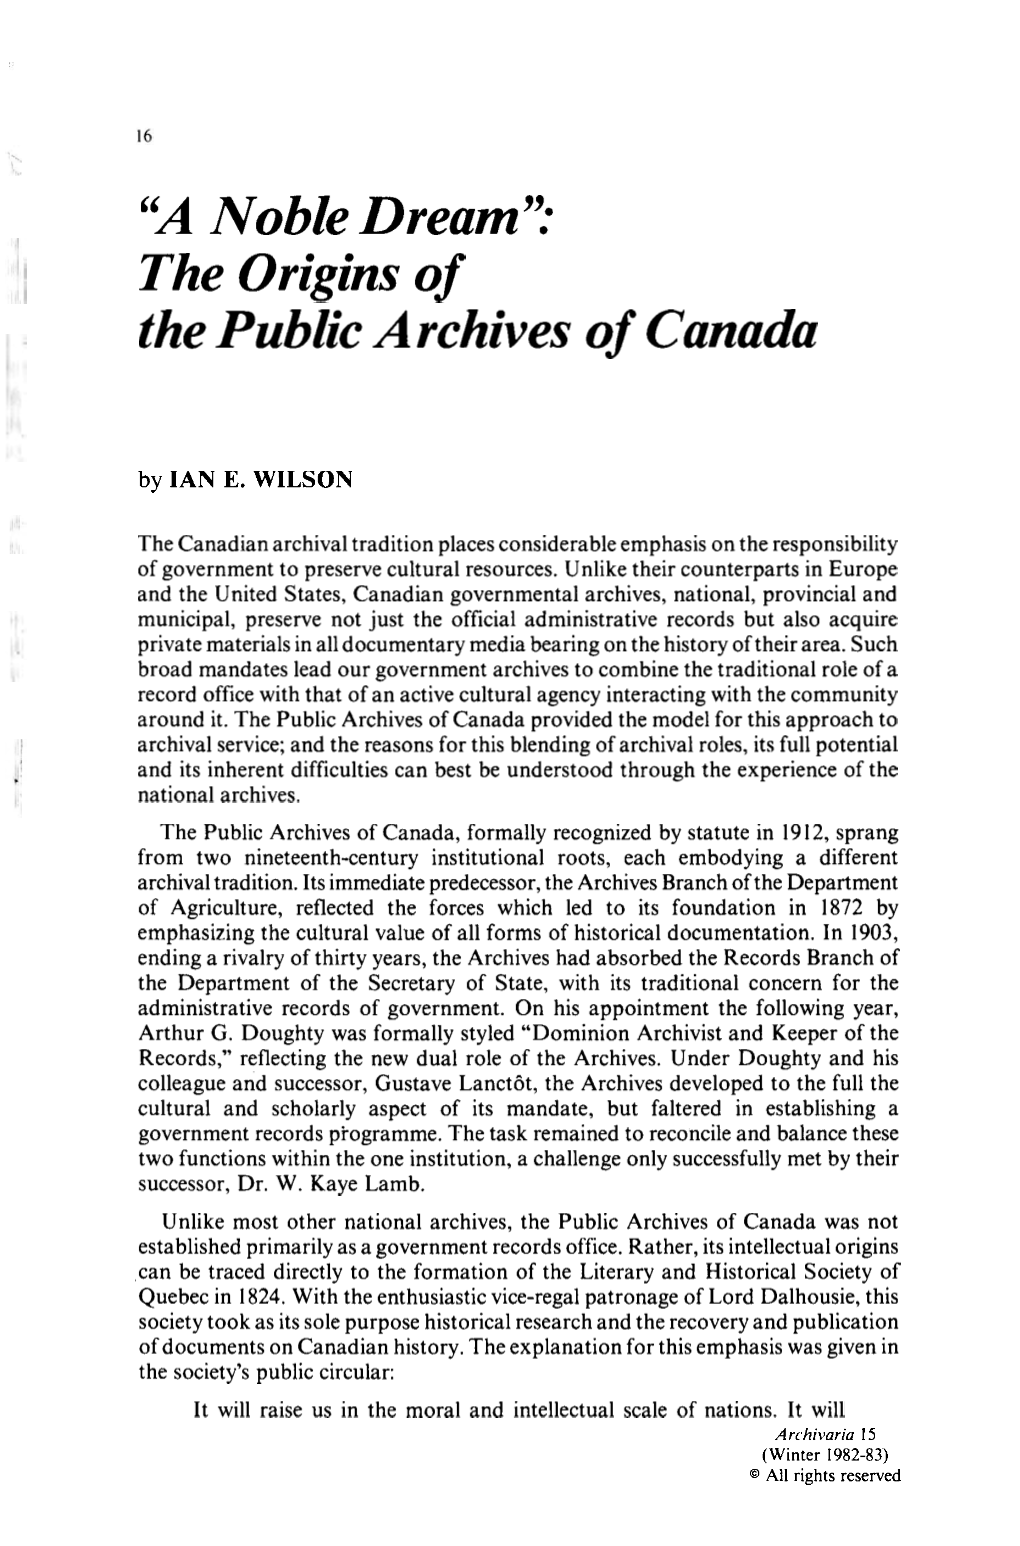 "A Noble Dream '? the Origins of the Public Archives of Canada